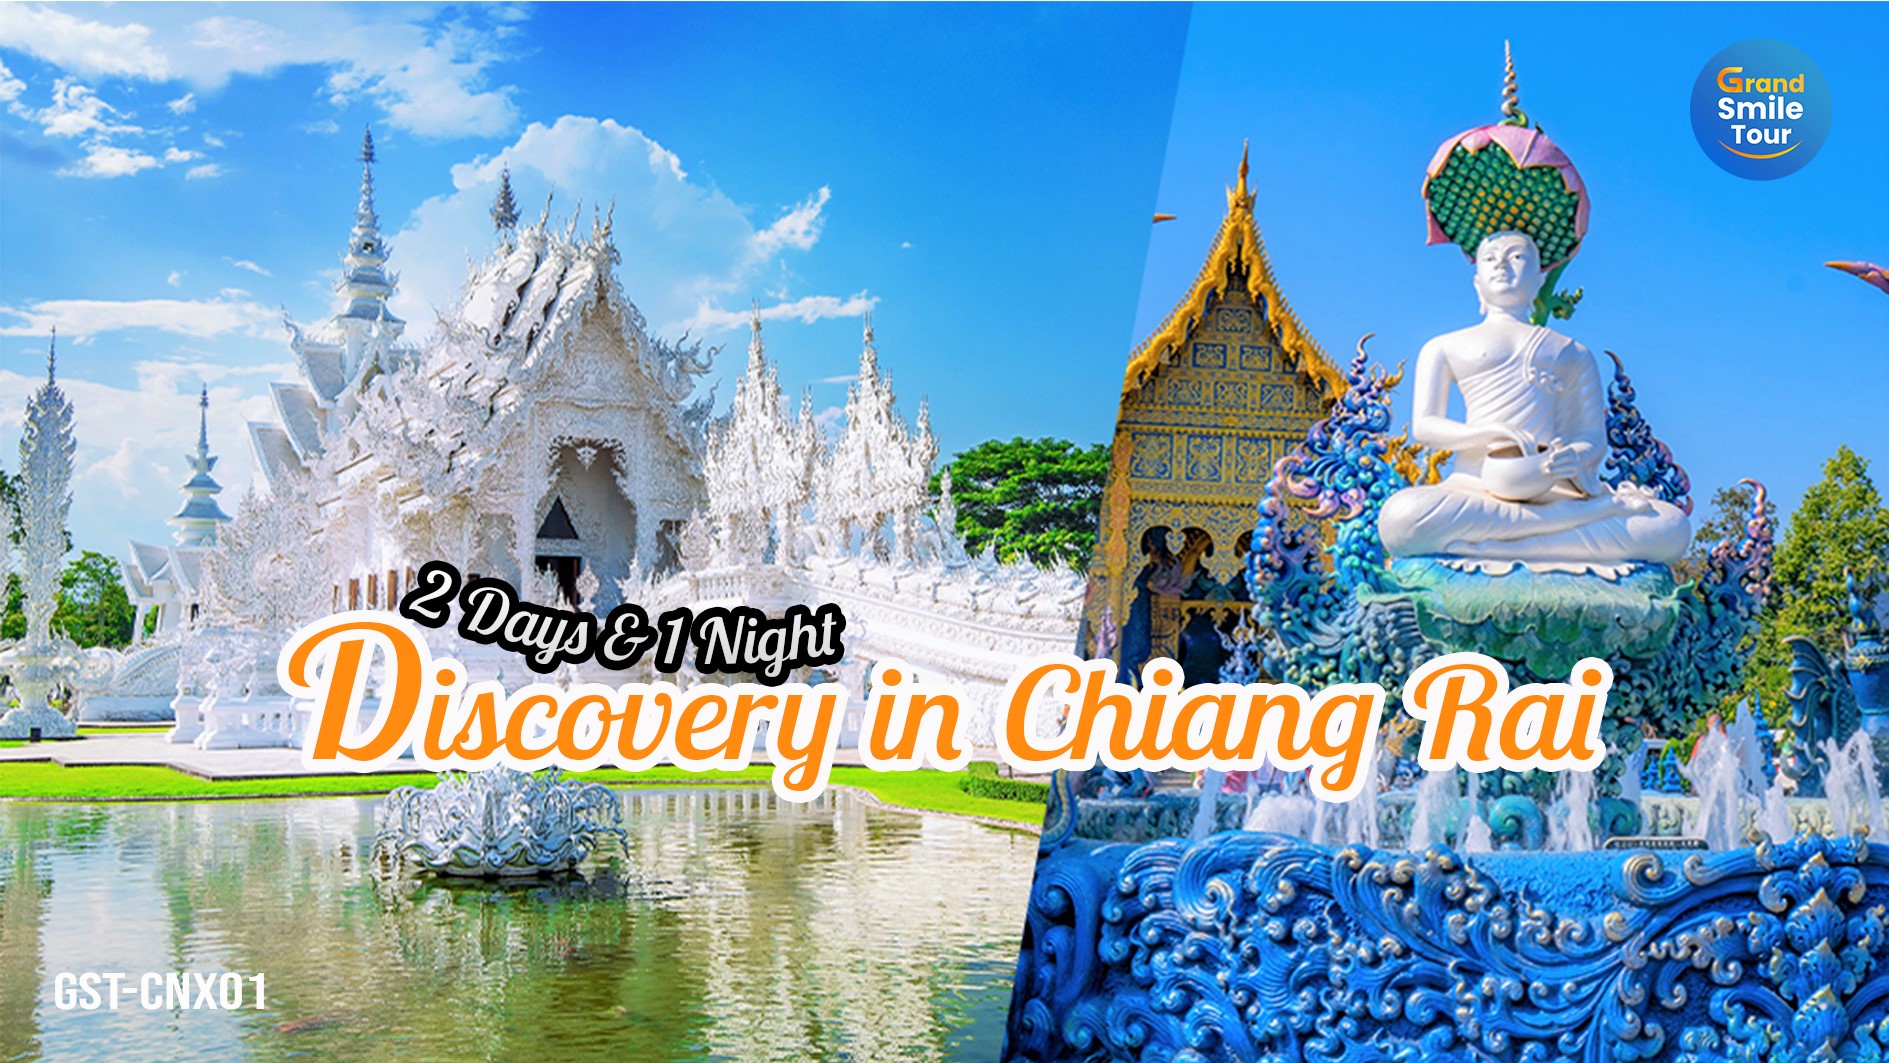 GST-CNX01 2 Days 1 Night - Discovey in Chiang Rai (2)